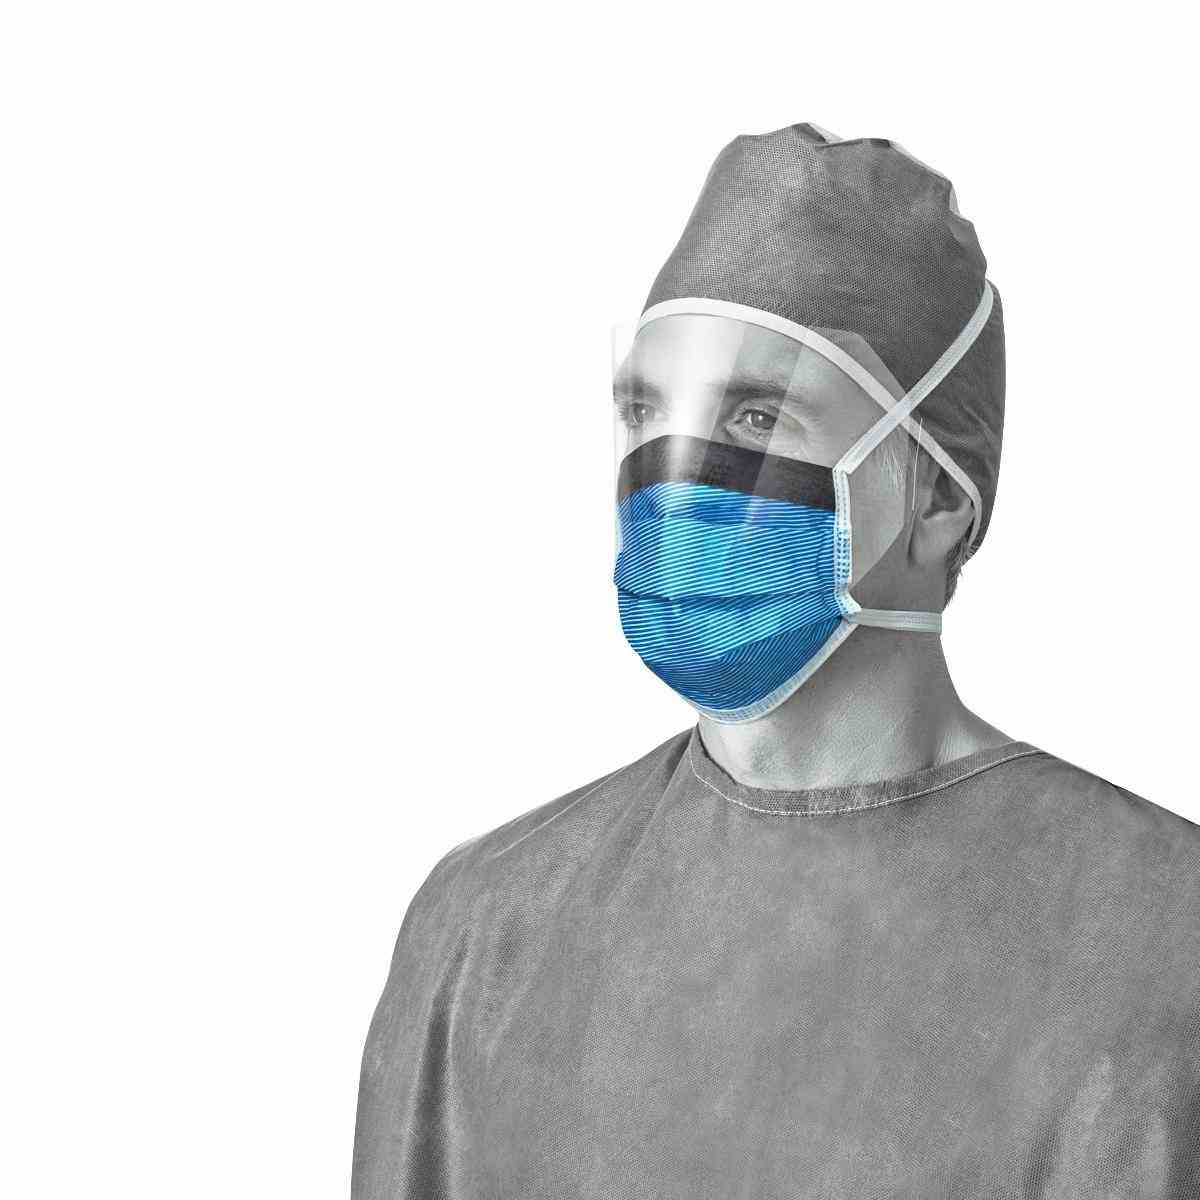 Medline ASTM Level 3 Surgical Face Masks with Eye Shield, NON27810, Case of 250